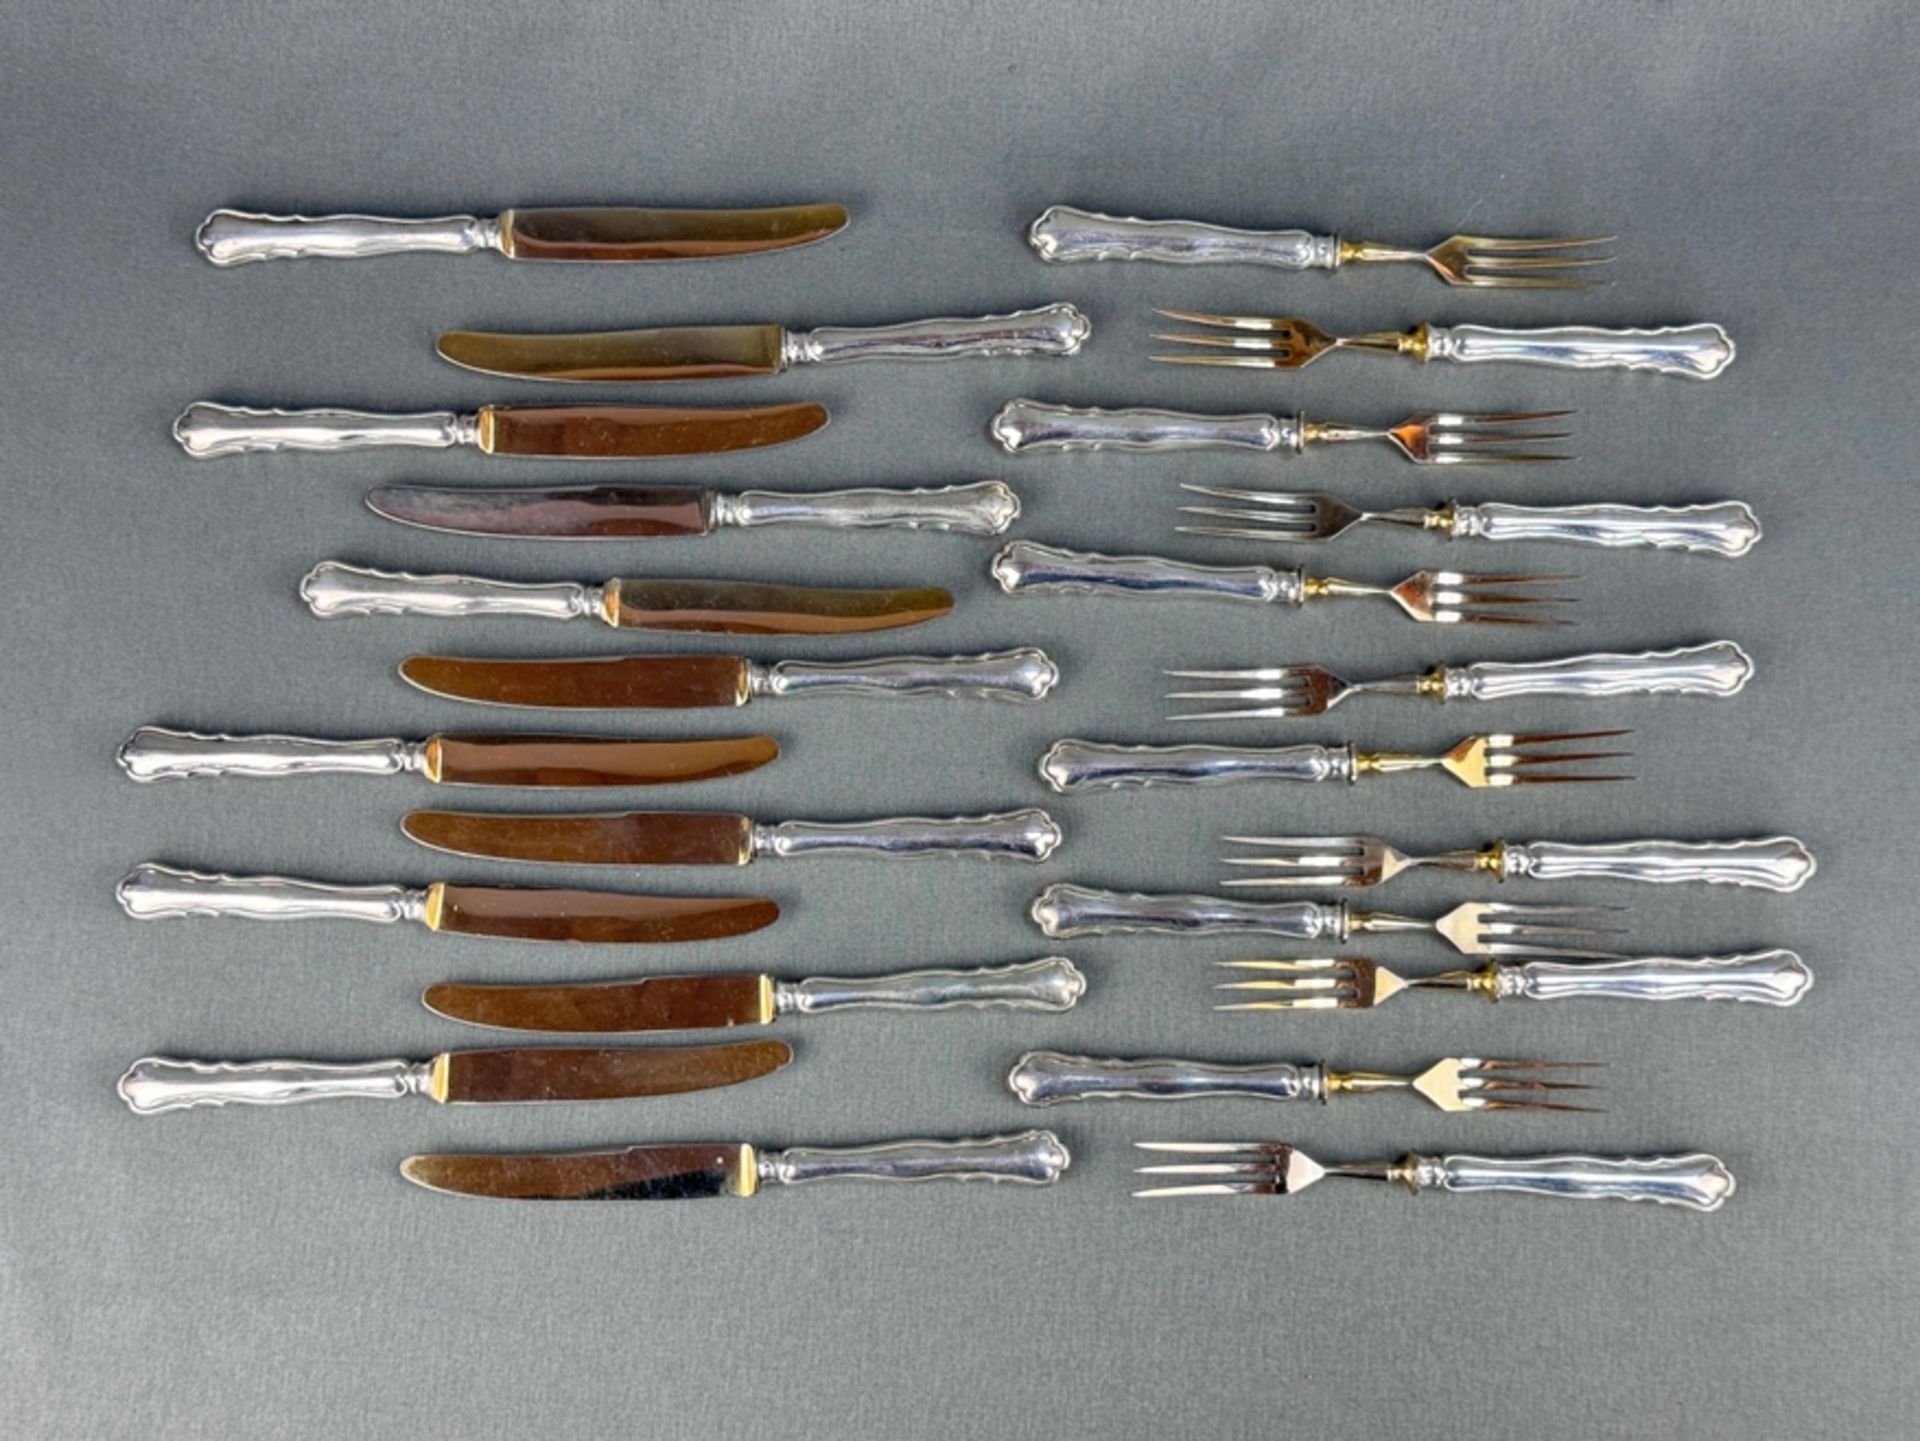 Fruit cutlery, 24-piece, silver 800 (tested), partially gold-plated, 290g without knives, 600g with